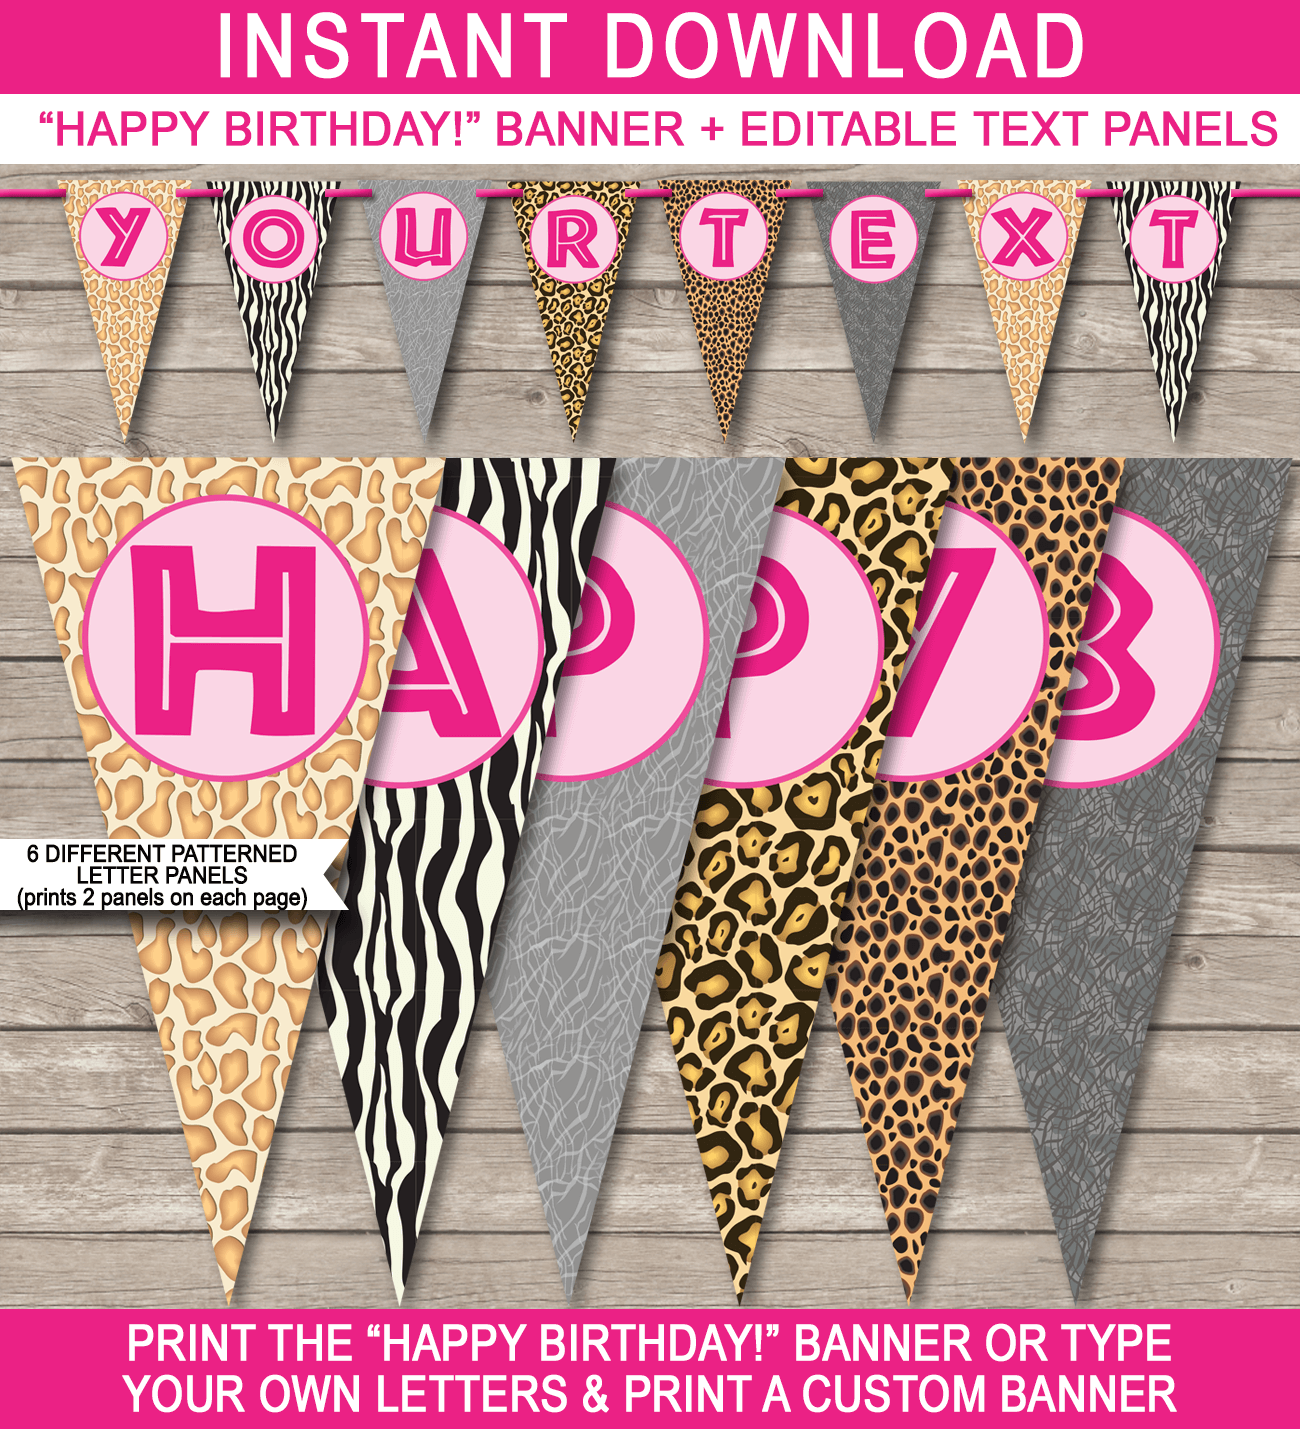 Pink Safari or Zoo Party Banner Template - Bunting - Happy Birthday Banner - Birthday Party - Editable and Printable DIY Template - INSTANT DOWNLOAD $4.50 via simonemadeit.com